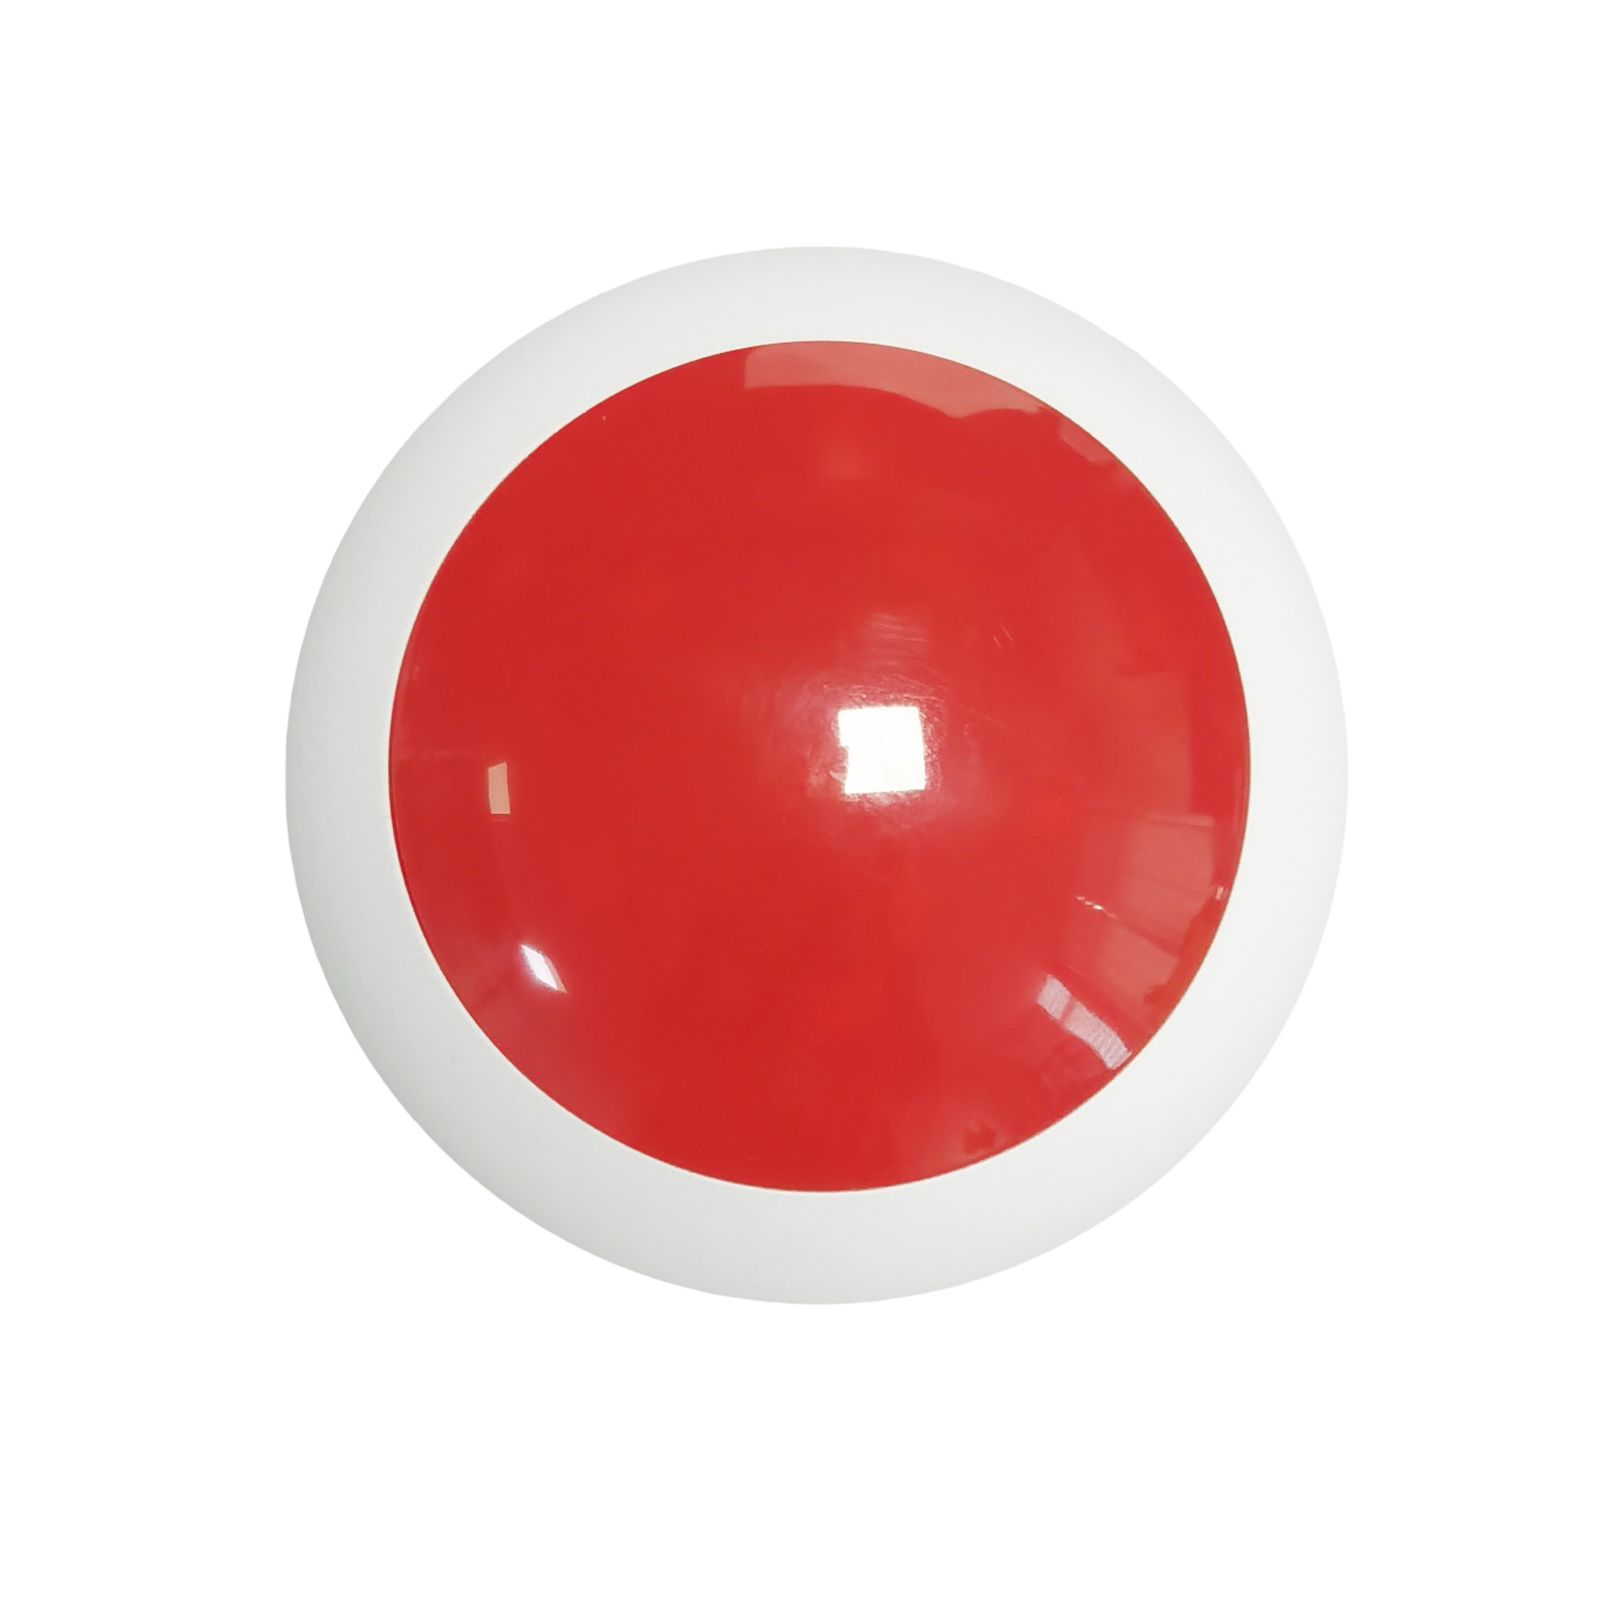 K-4L light red cover Clinic Call Bell Equipment